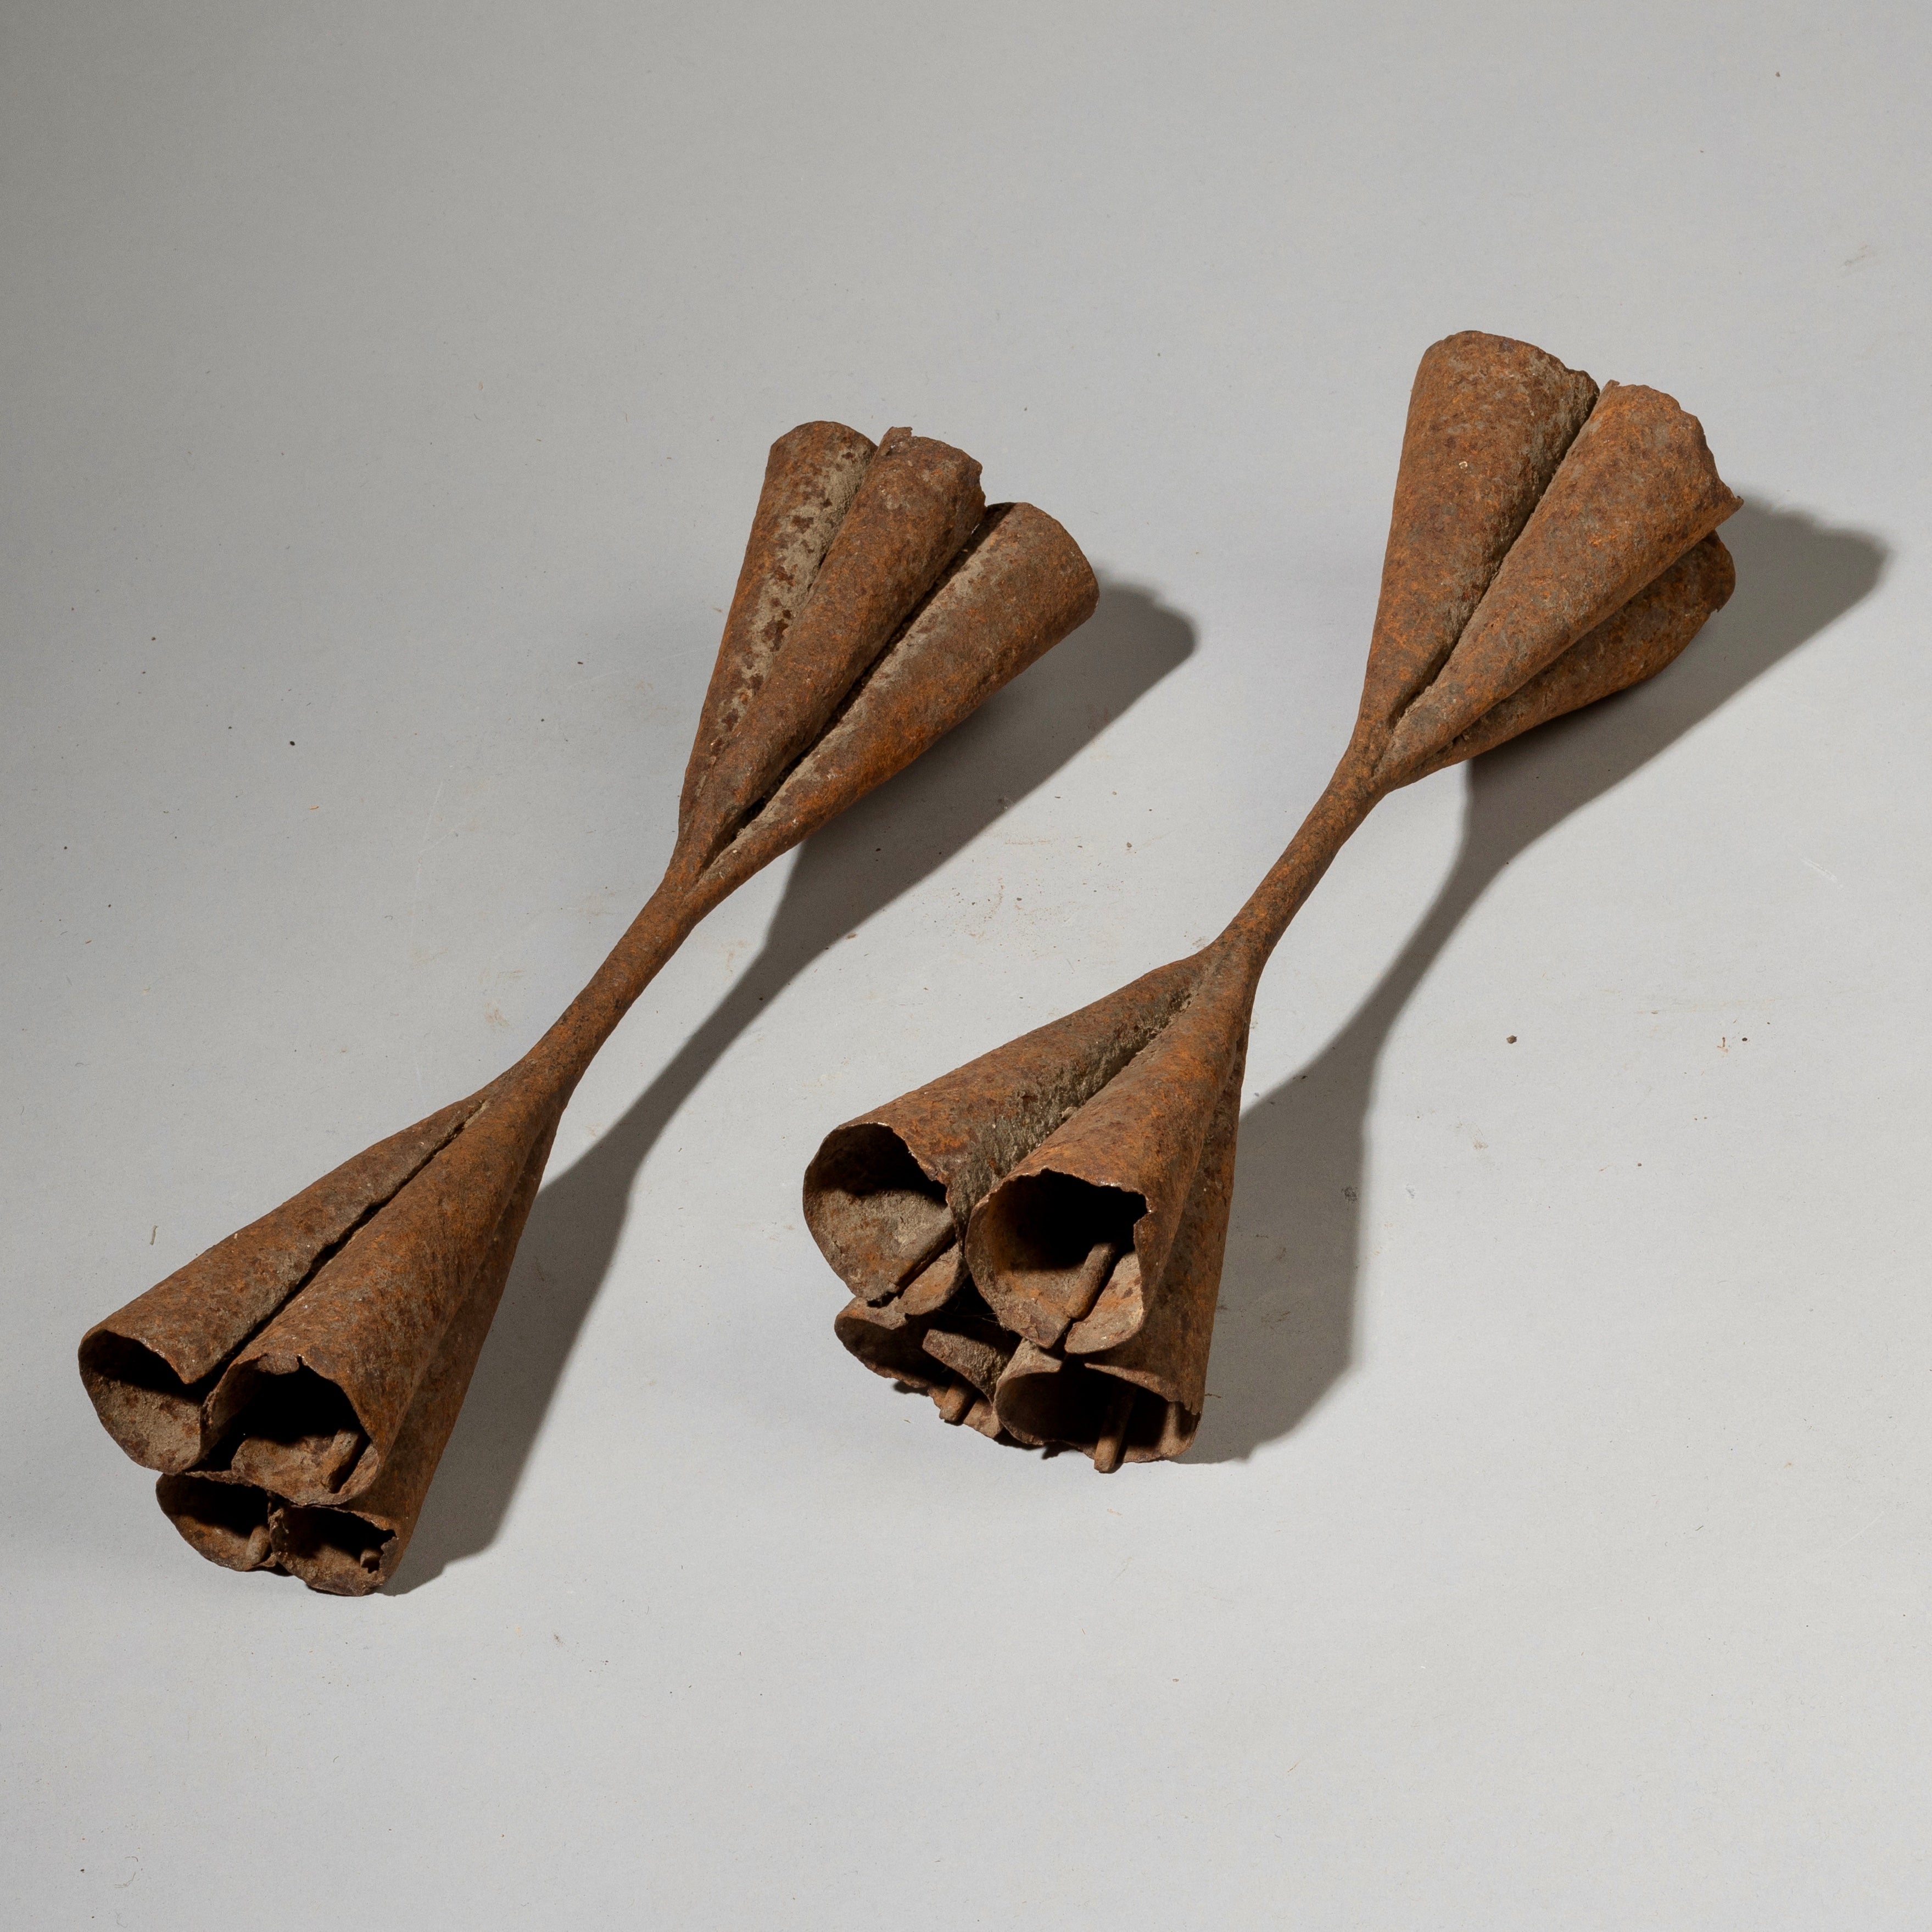 2 TRADITIONAL IRON BELLS FROM CAMEROON, W.AFRICA ( No 2096)